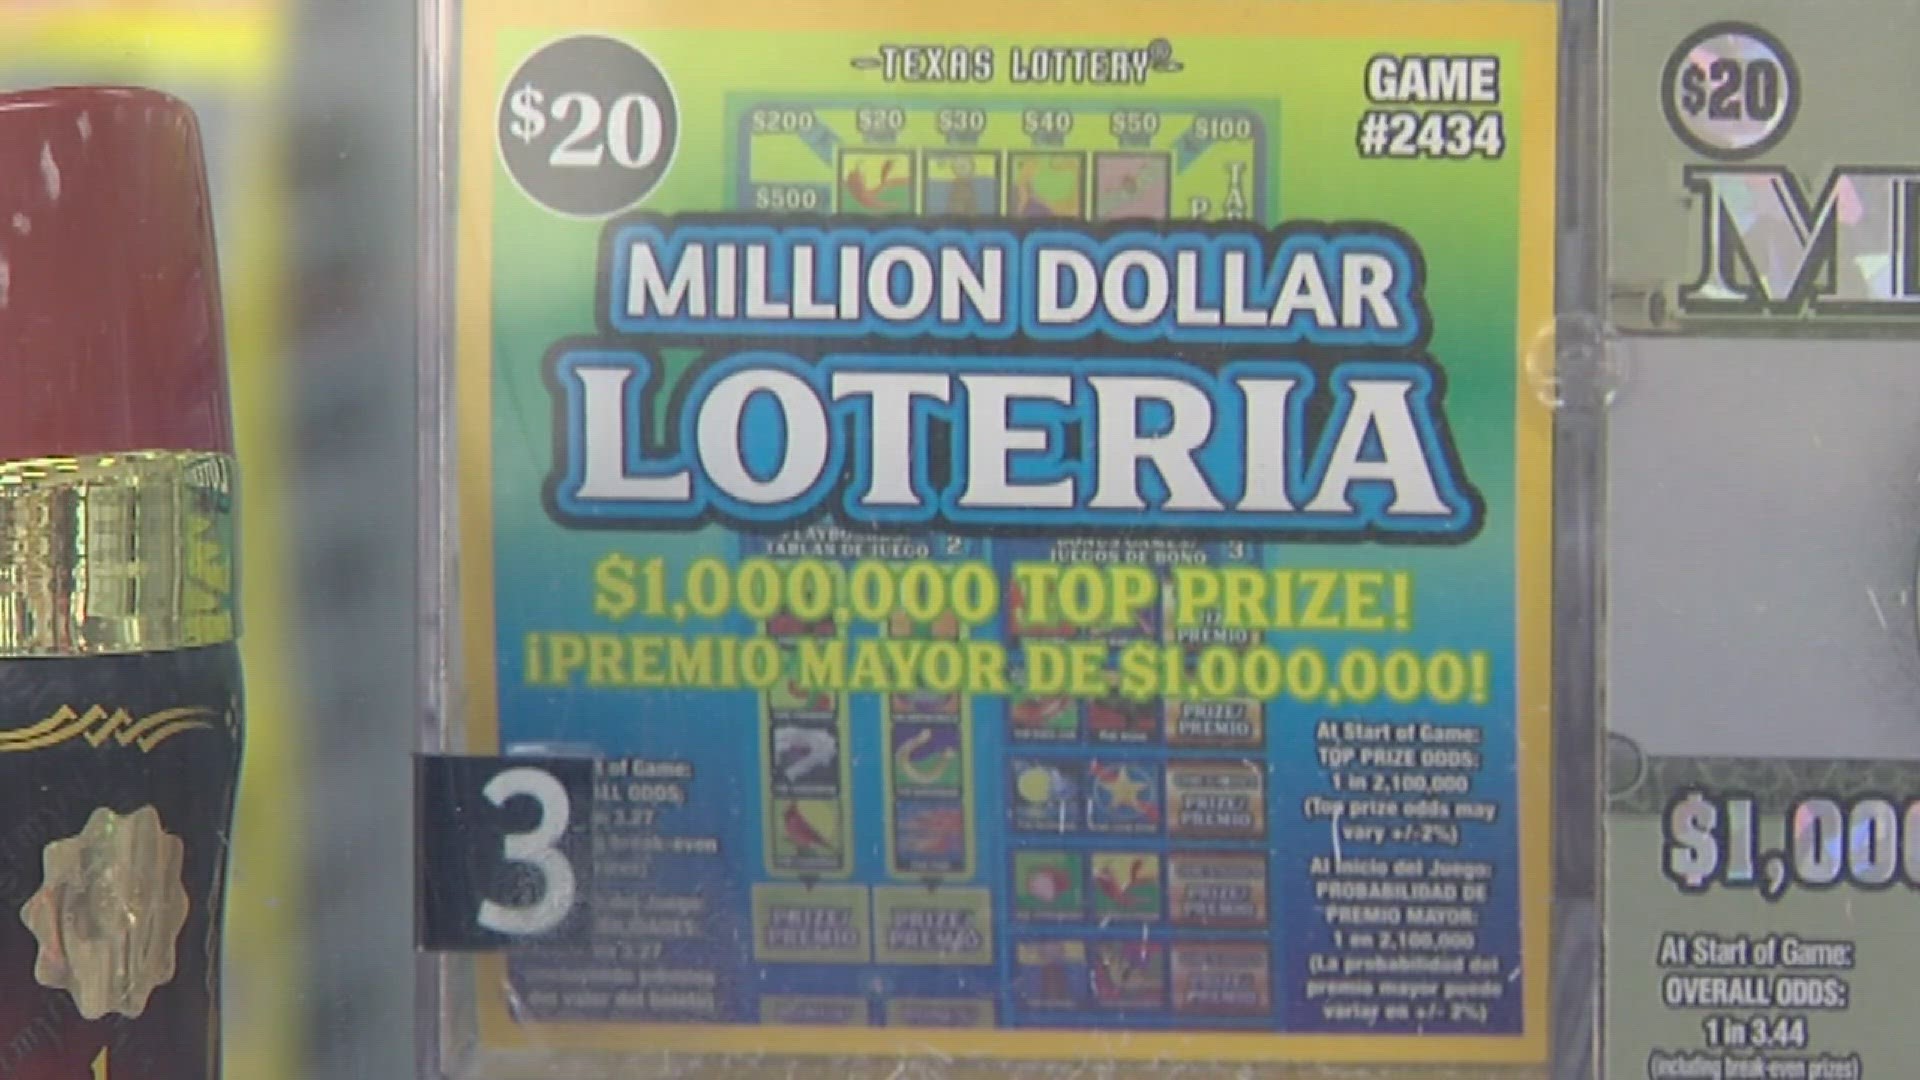 Beaumont resident wins $1M in Texas Lottery scratch ticket